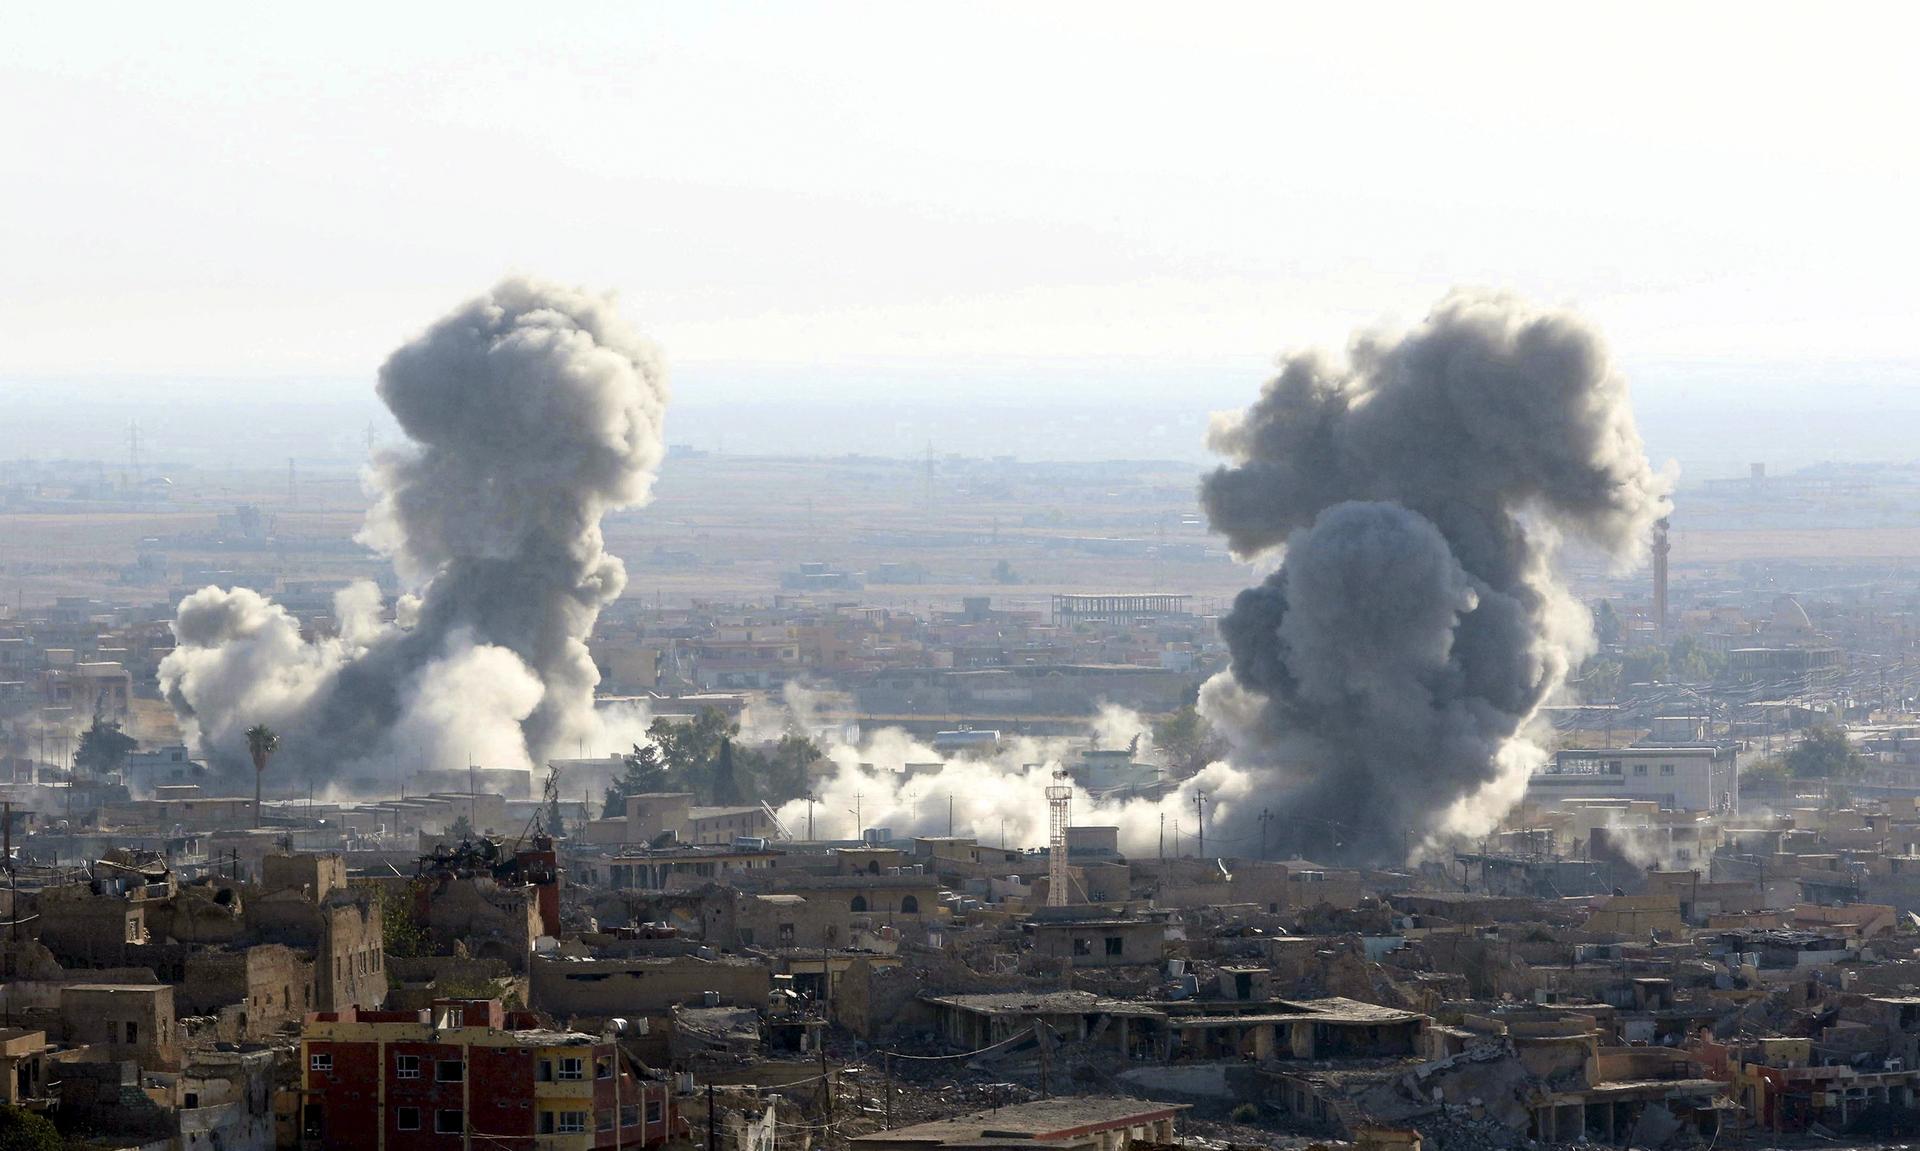 Smoke rises from the site of U.S.-led air strikes in the town of Sinjar, Iraq November 13, 2015.